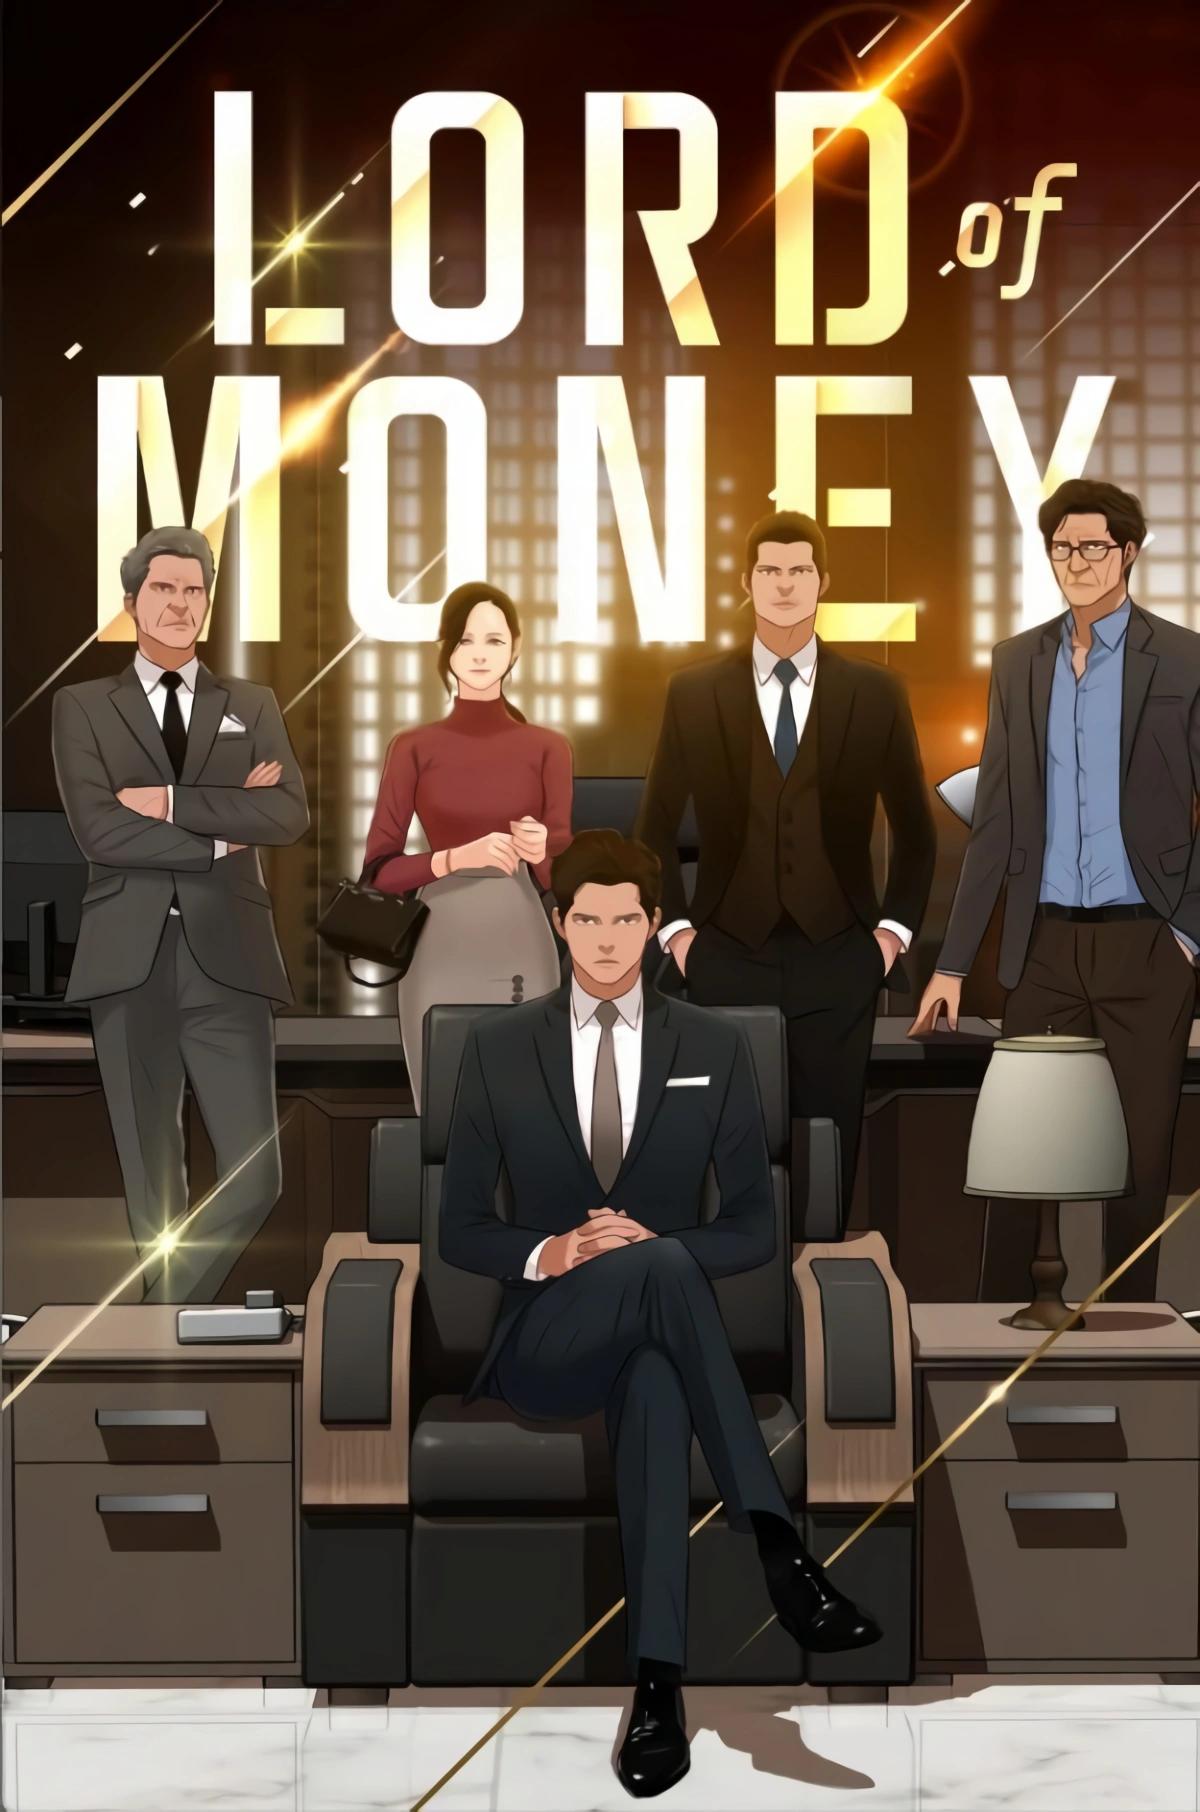 Lord of Money cover image